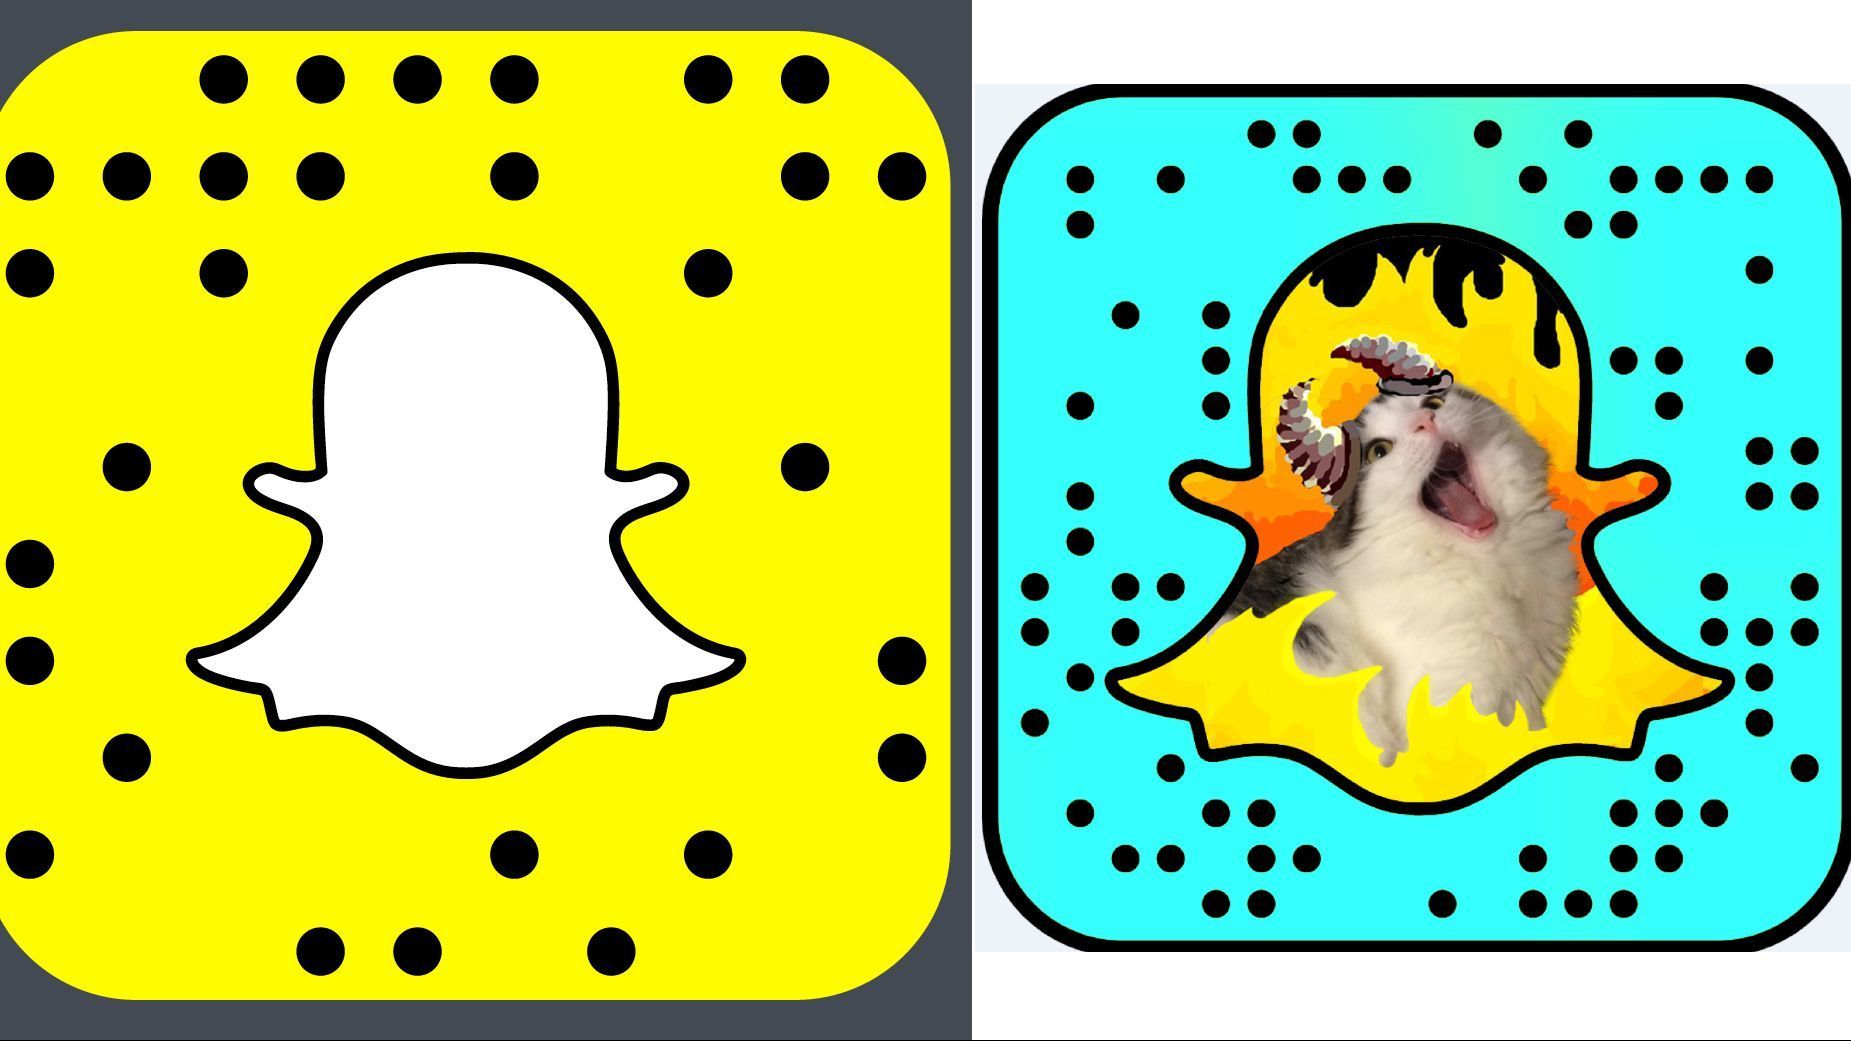 SNAPCODES: Snap reportedly paid $54 million for Scan, which developed a way for users to create custom barcodes that could be scanned from a smartphone app, such as Snapchat.